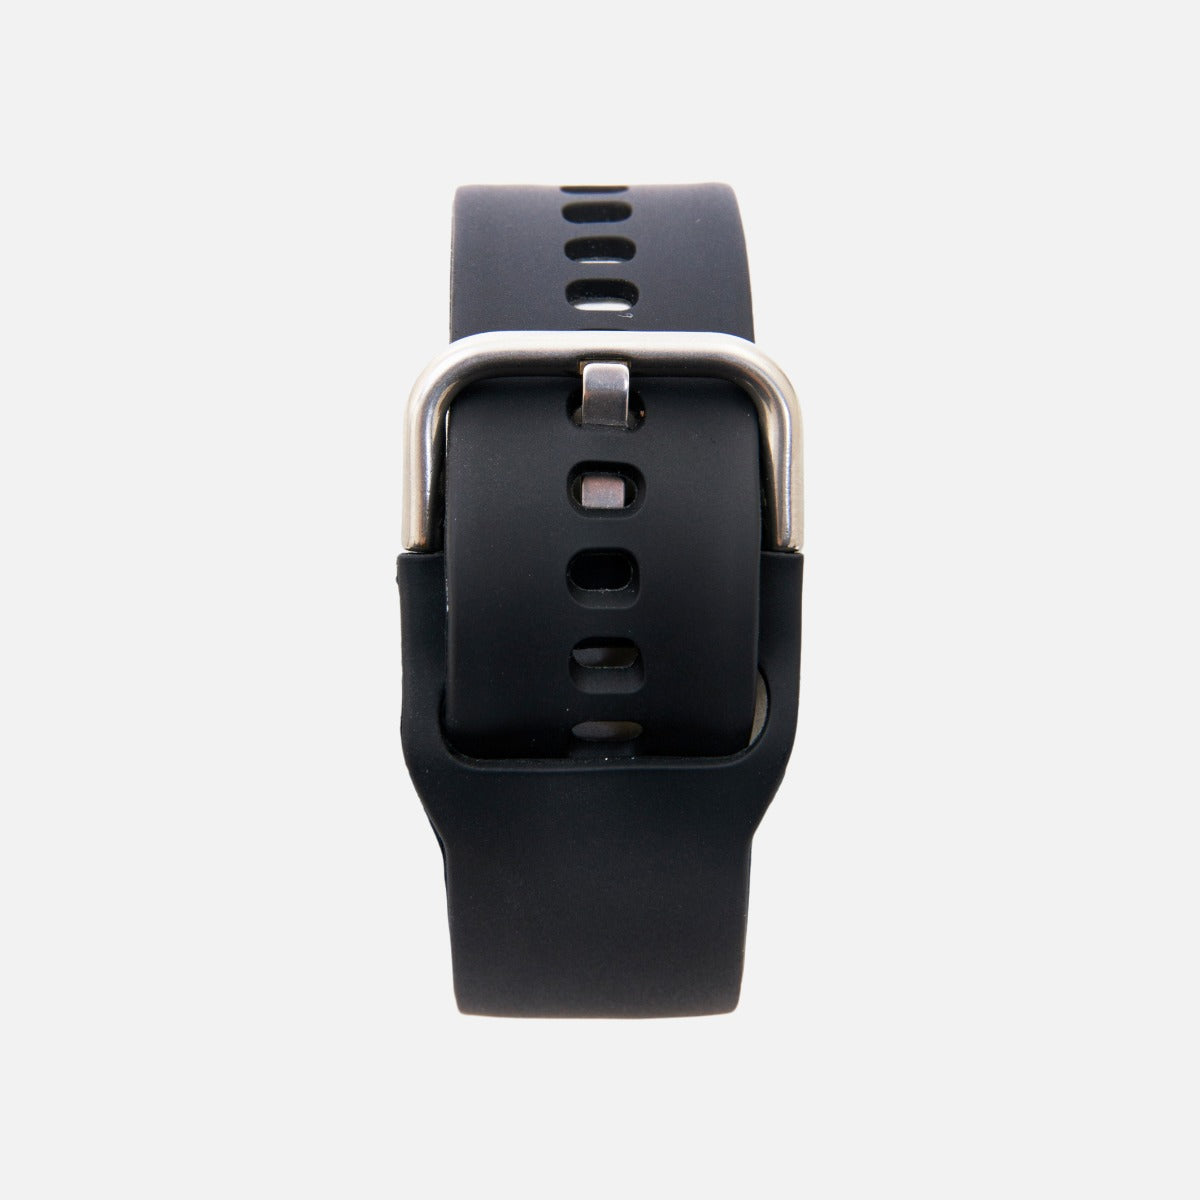 Innova collection - black smart watch with digital screen